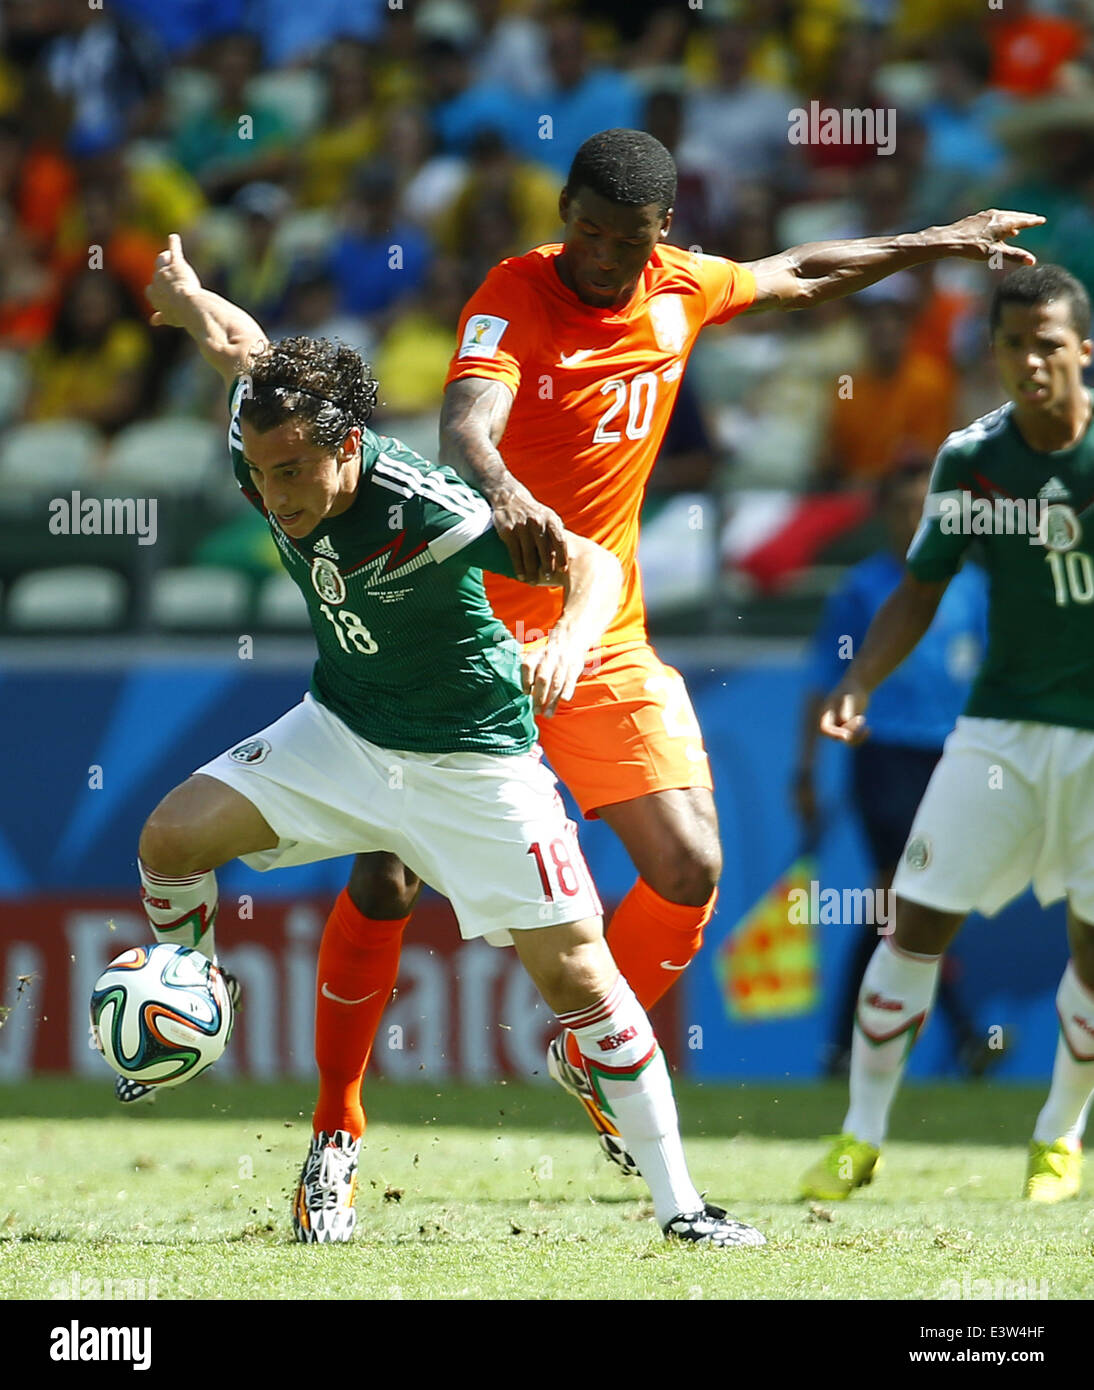 Fortaleza, Brazil. 29th June, 2014. Netherlands's Georginio Wijnaldum (R) vies with Mexico's Andres Guardado during a Round of 16 match between Netherlands and Mexico of 2014 FIFA World Cup at the Estadio Castelao Stadium in Fortaleza, Brazil, on June 29, 2014. Credit:  Chen Jianli/Xinhua/Alamy Live News Stock Photo